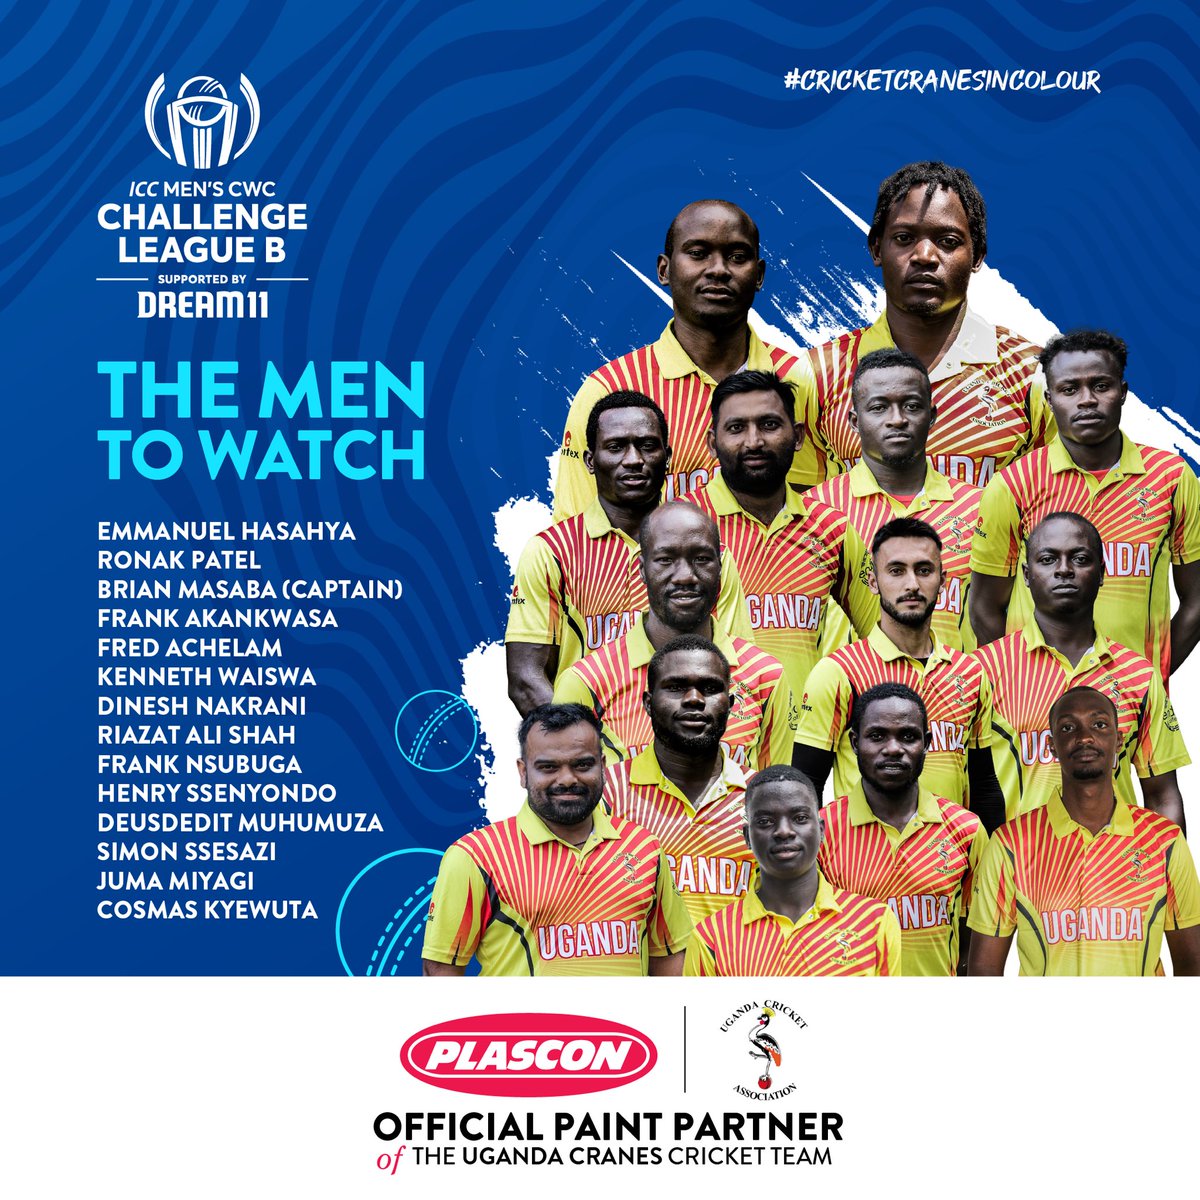 With afew hours to the ICC Cricket World Cup Challenge B League that's happening tomorrow at Lugogo Cricket Oval!

Here's the @CricketUganda 's team to watch! 🏏

Come let's support the Cricket Cranes✊🇺🇬

#TheRoadToCWC23 #CricketCranesInColour